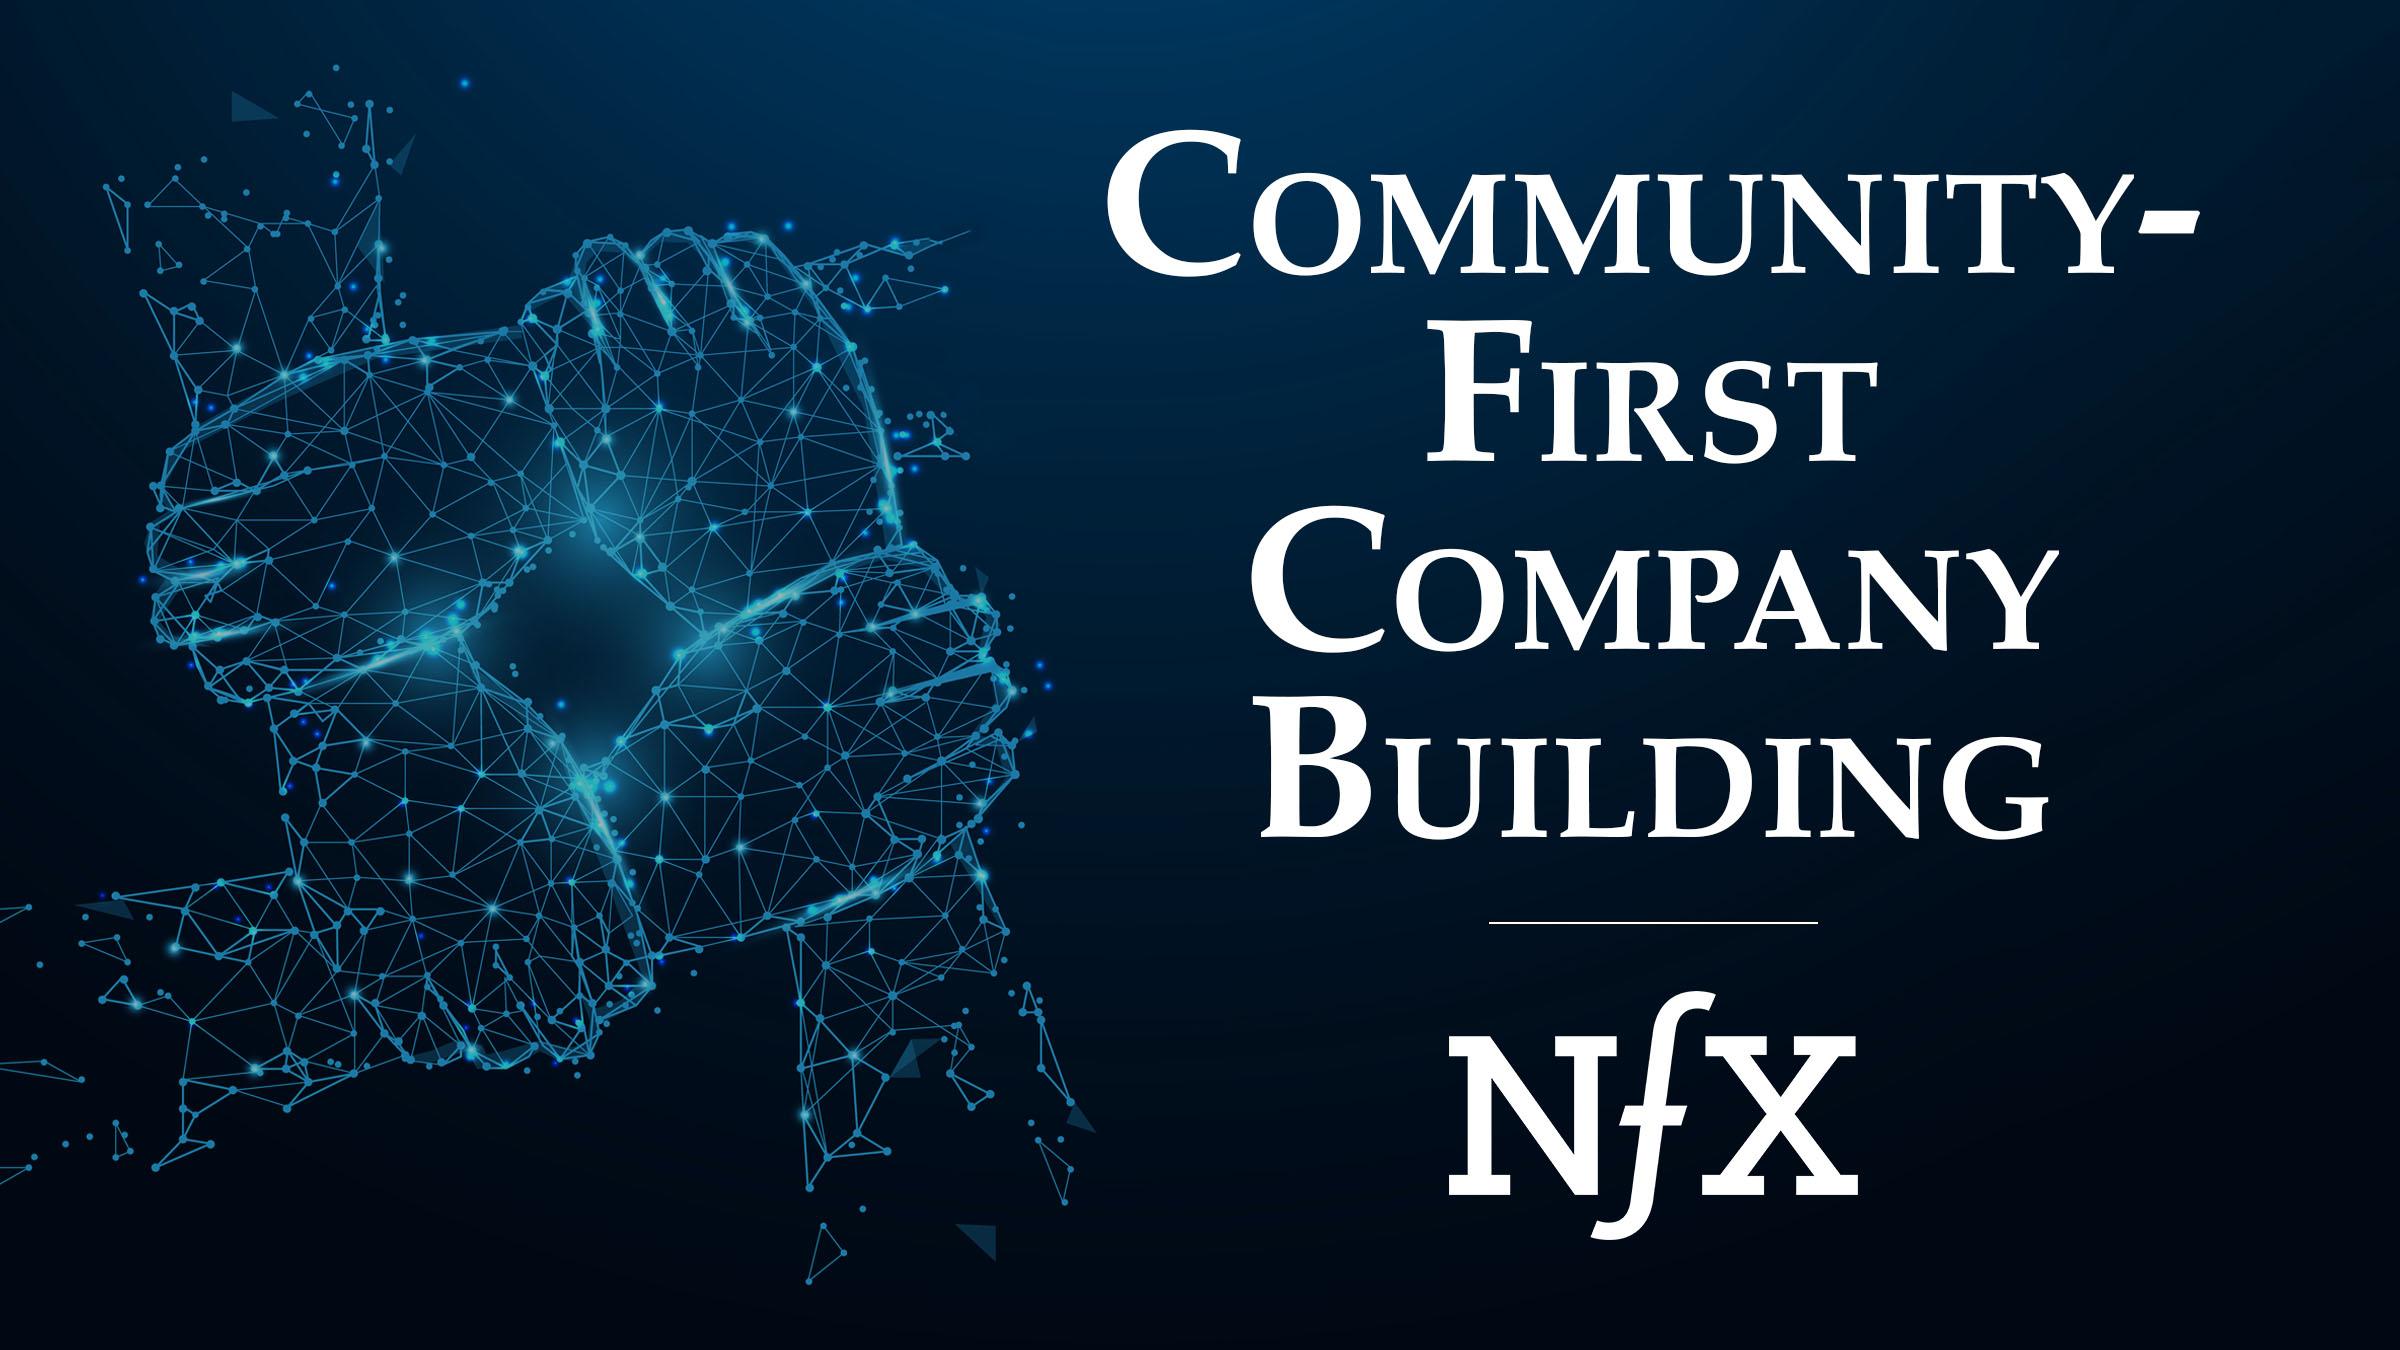 Building A “Community-First” Company